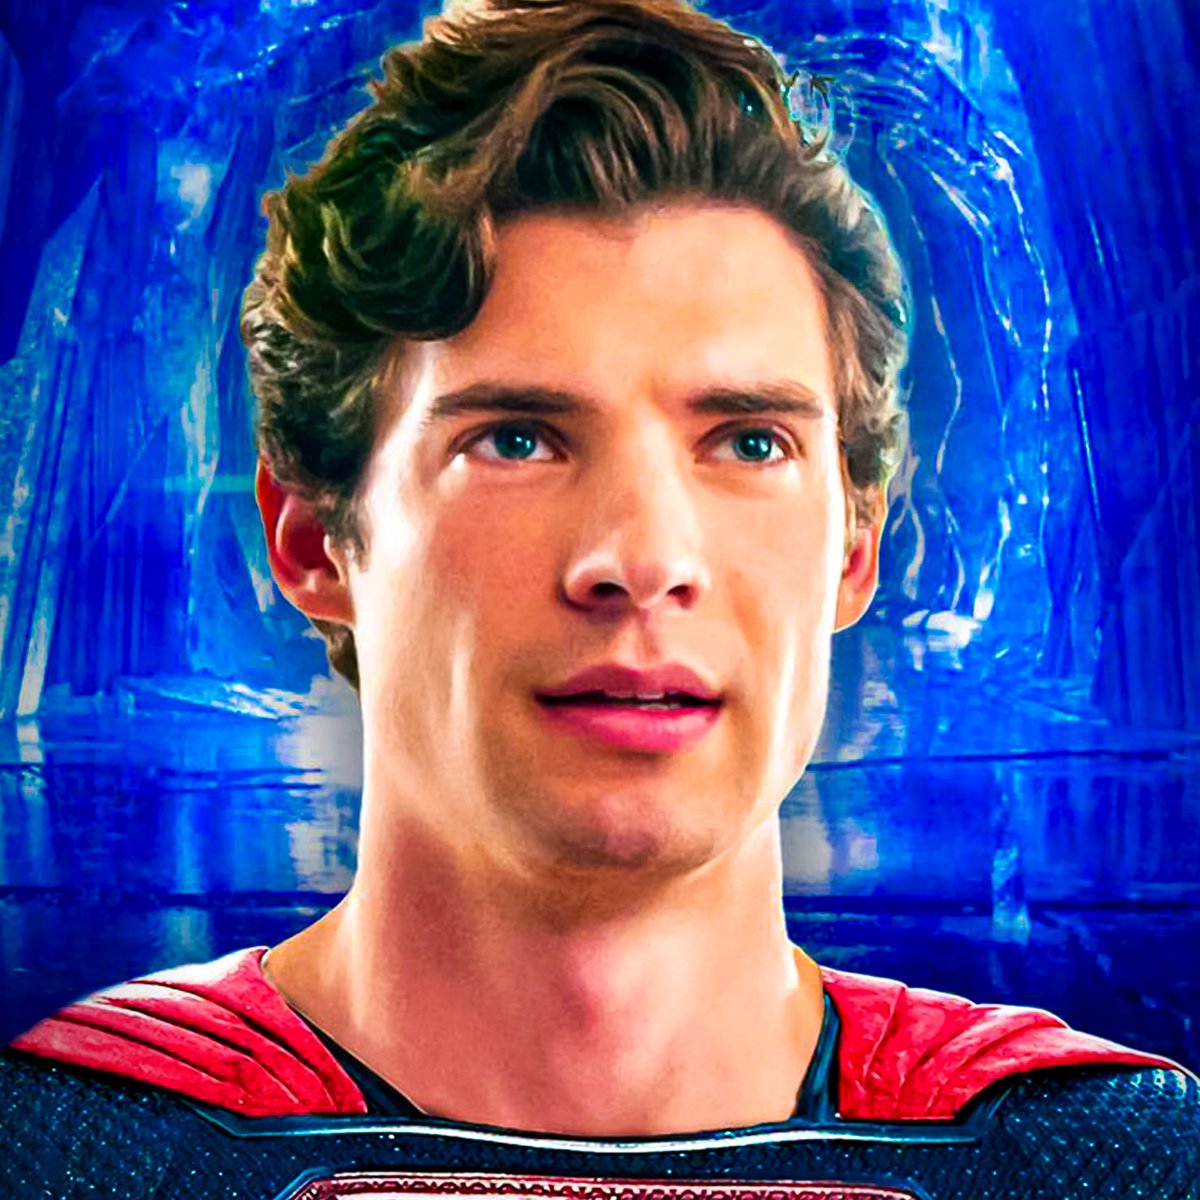 James Gunn has confirmed that his SUPERMAN movie has filmed its 'first scenes' in Norway of #Superman 'fleeing' to the Fortress of Solitude! Full quote: thedirect.com/article/superm…